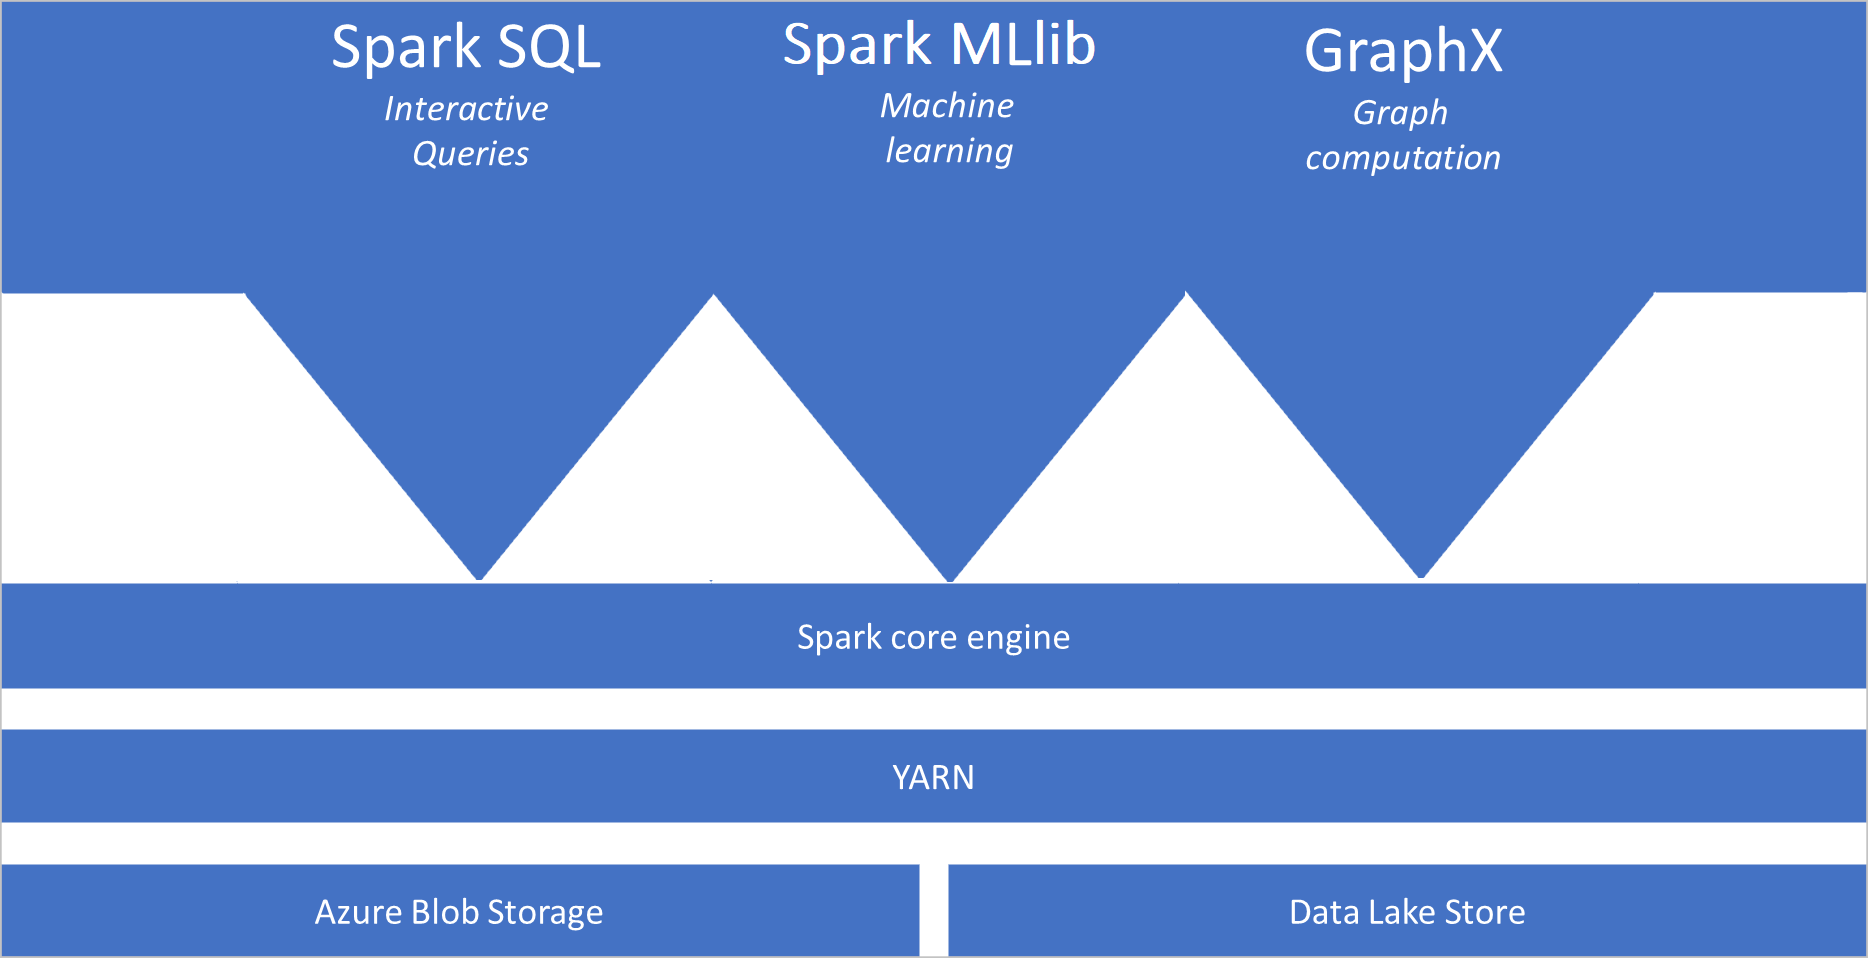 Diagram shows Spark SQL, Spark MLib, and GraphX linked to the Spark core engine, above a YARN layer over storage services.